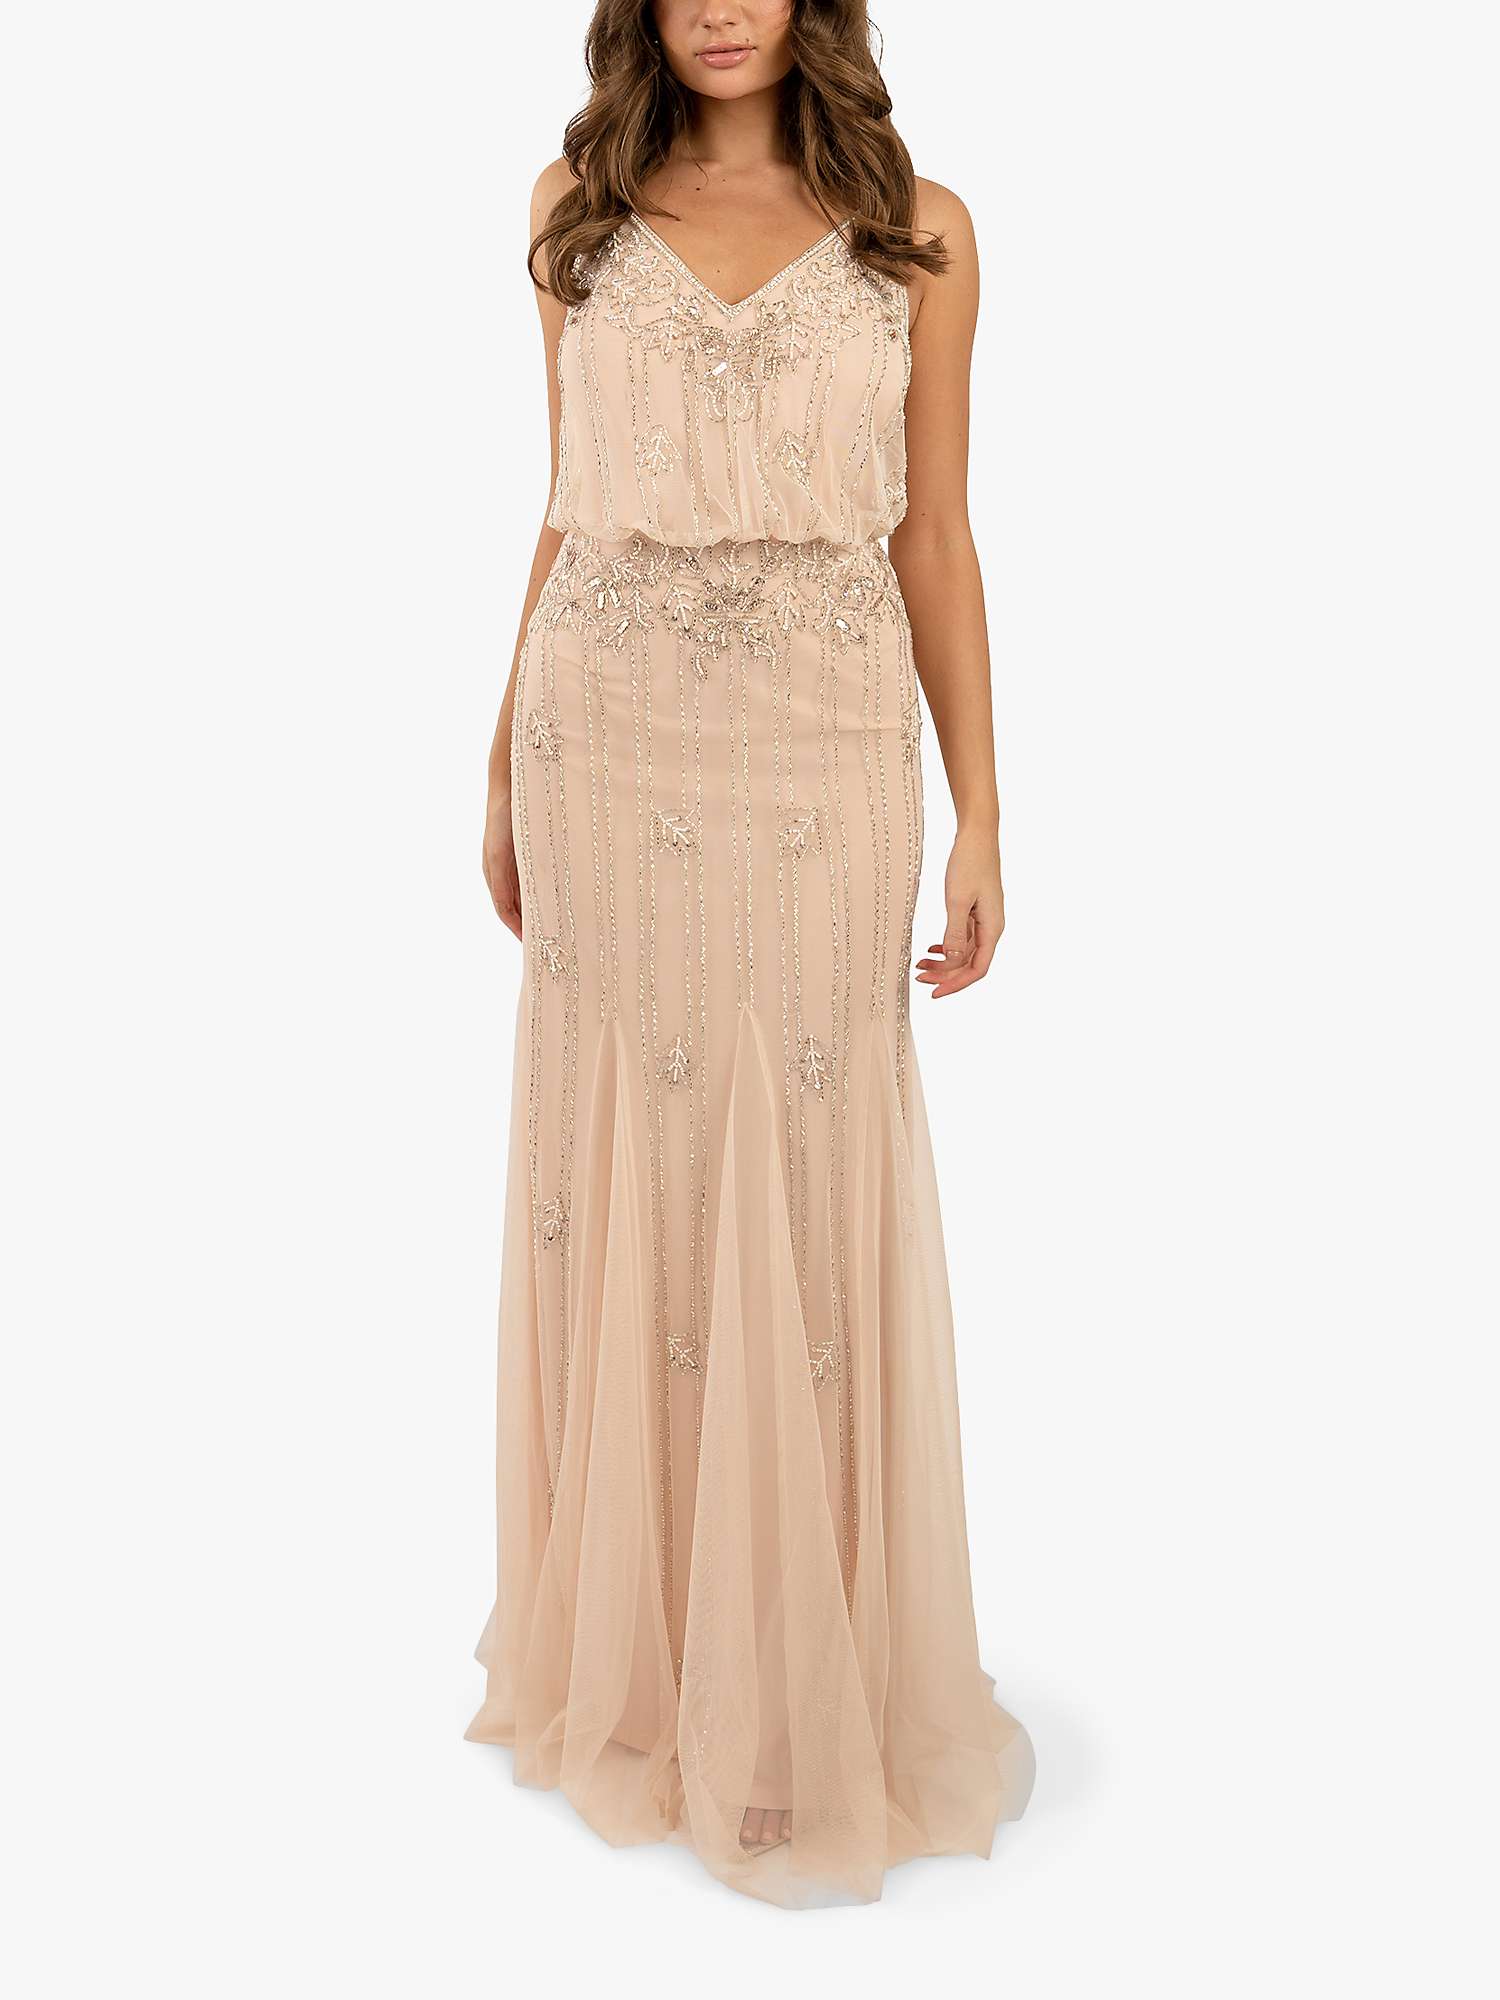 Buy Lace & Beads Keeva V-Neck Maxi Dress, Nude Online at johnlewis.com